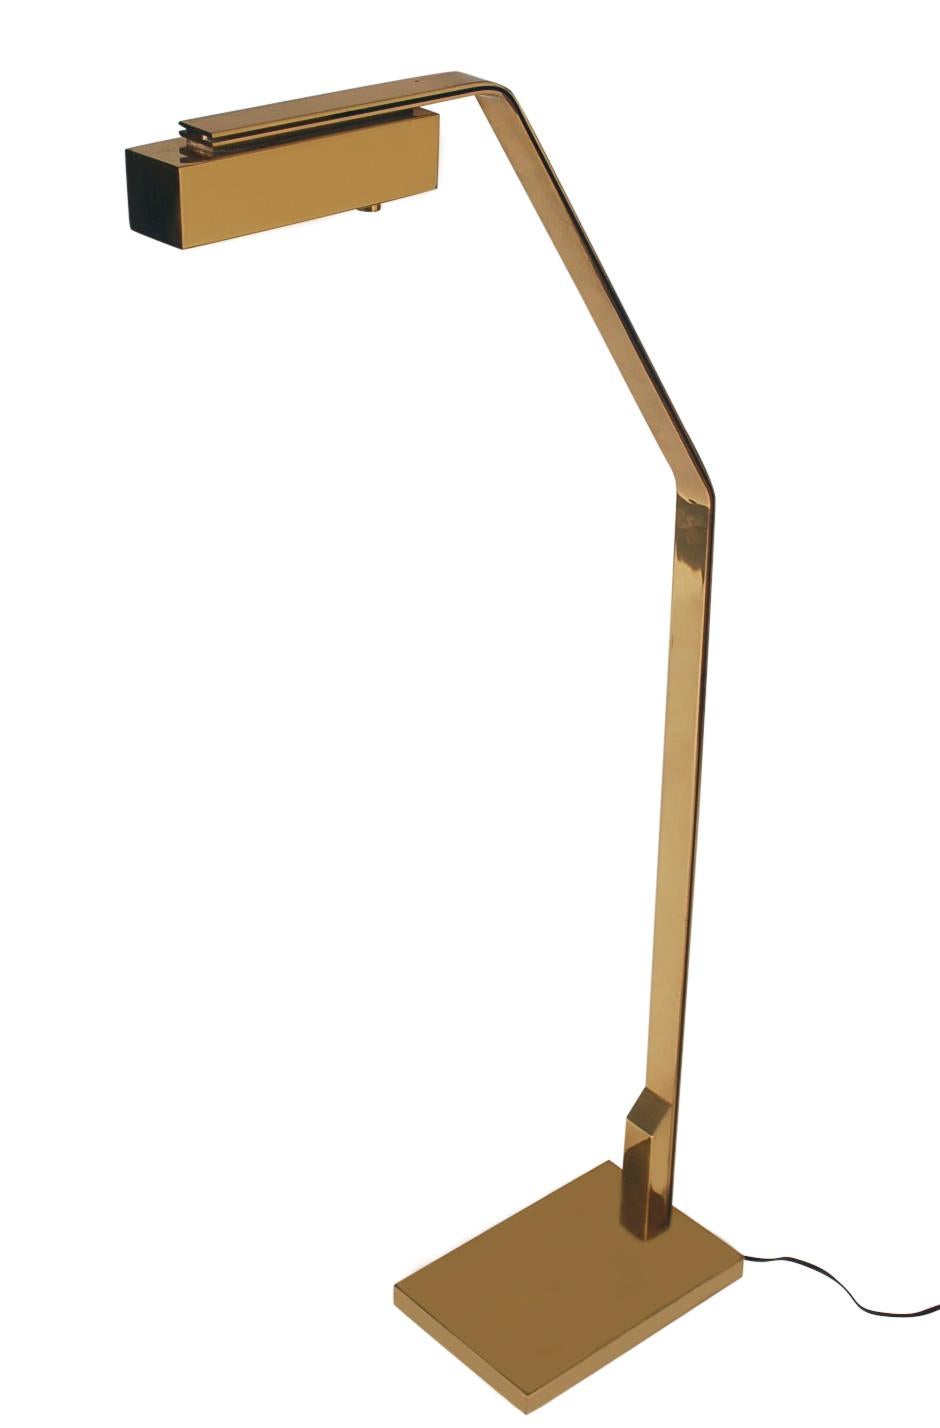 An impressive and finely crafted lamp made by Casella in the 1970s from Italy. It features heavy brass construction, pivoting lamp head, and dimmer switch. Works with one standard size bulb.